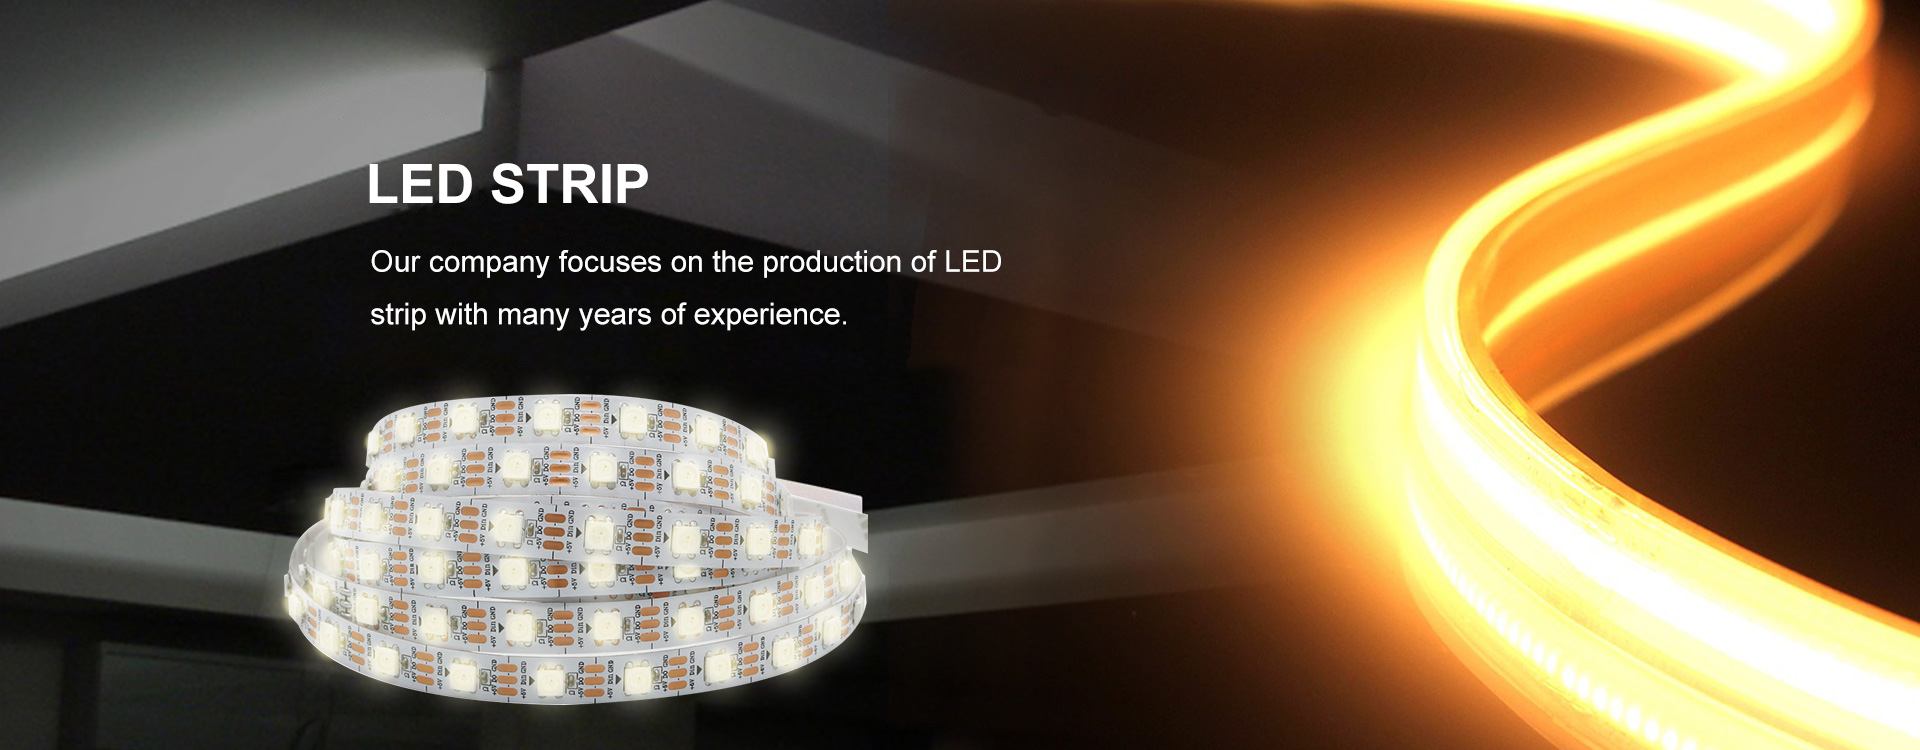 China LED Strip Manufacturers and Suppliers